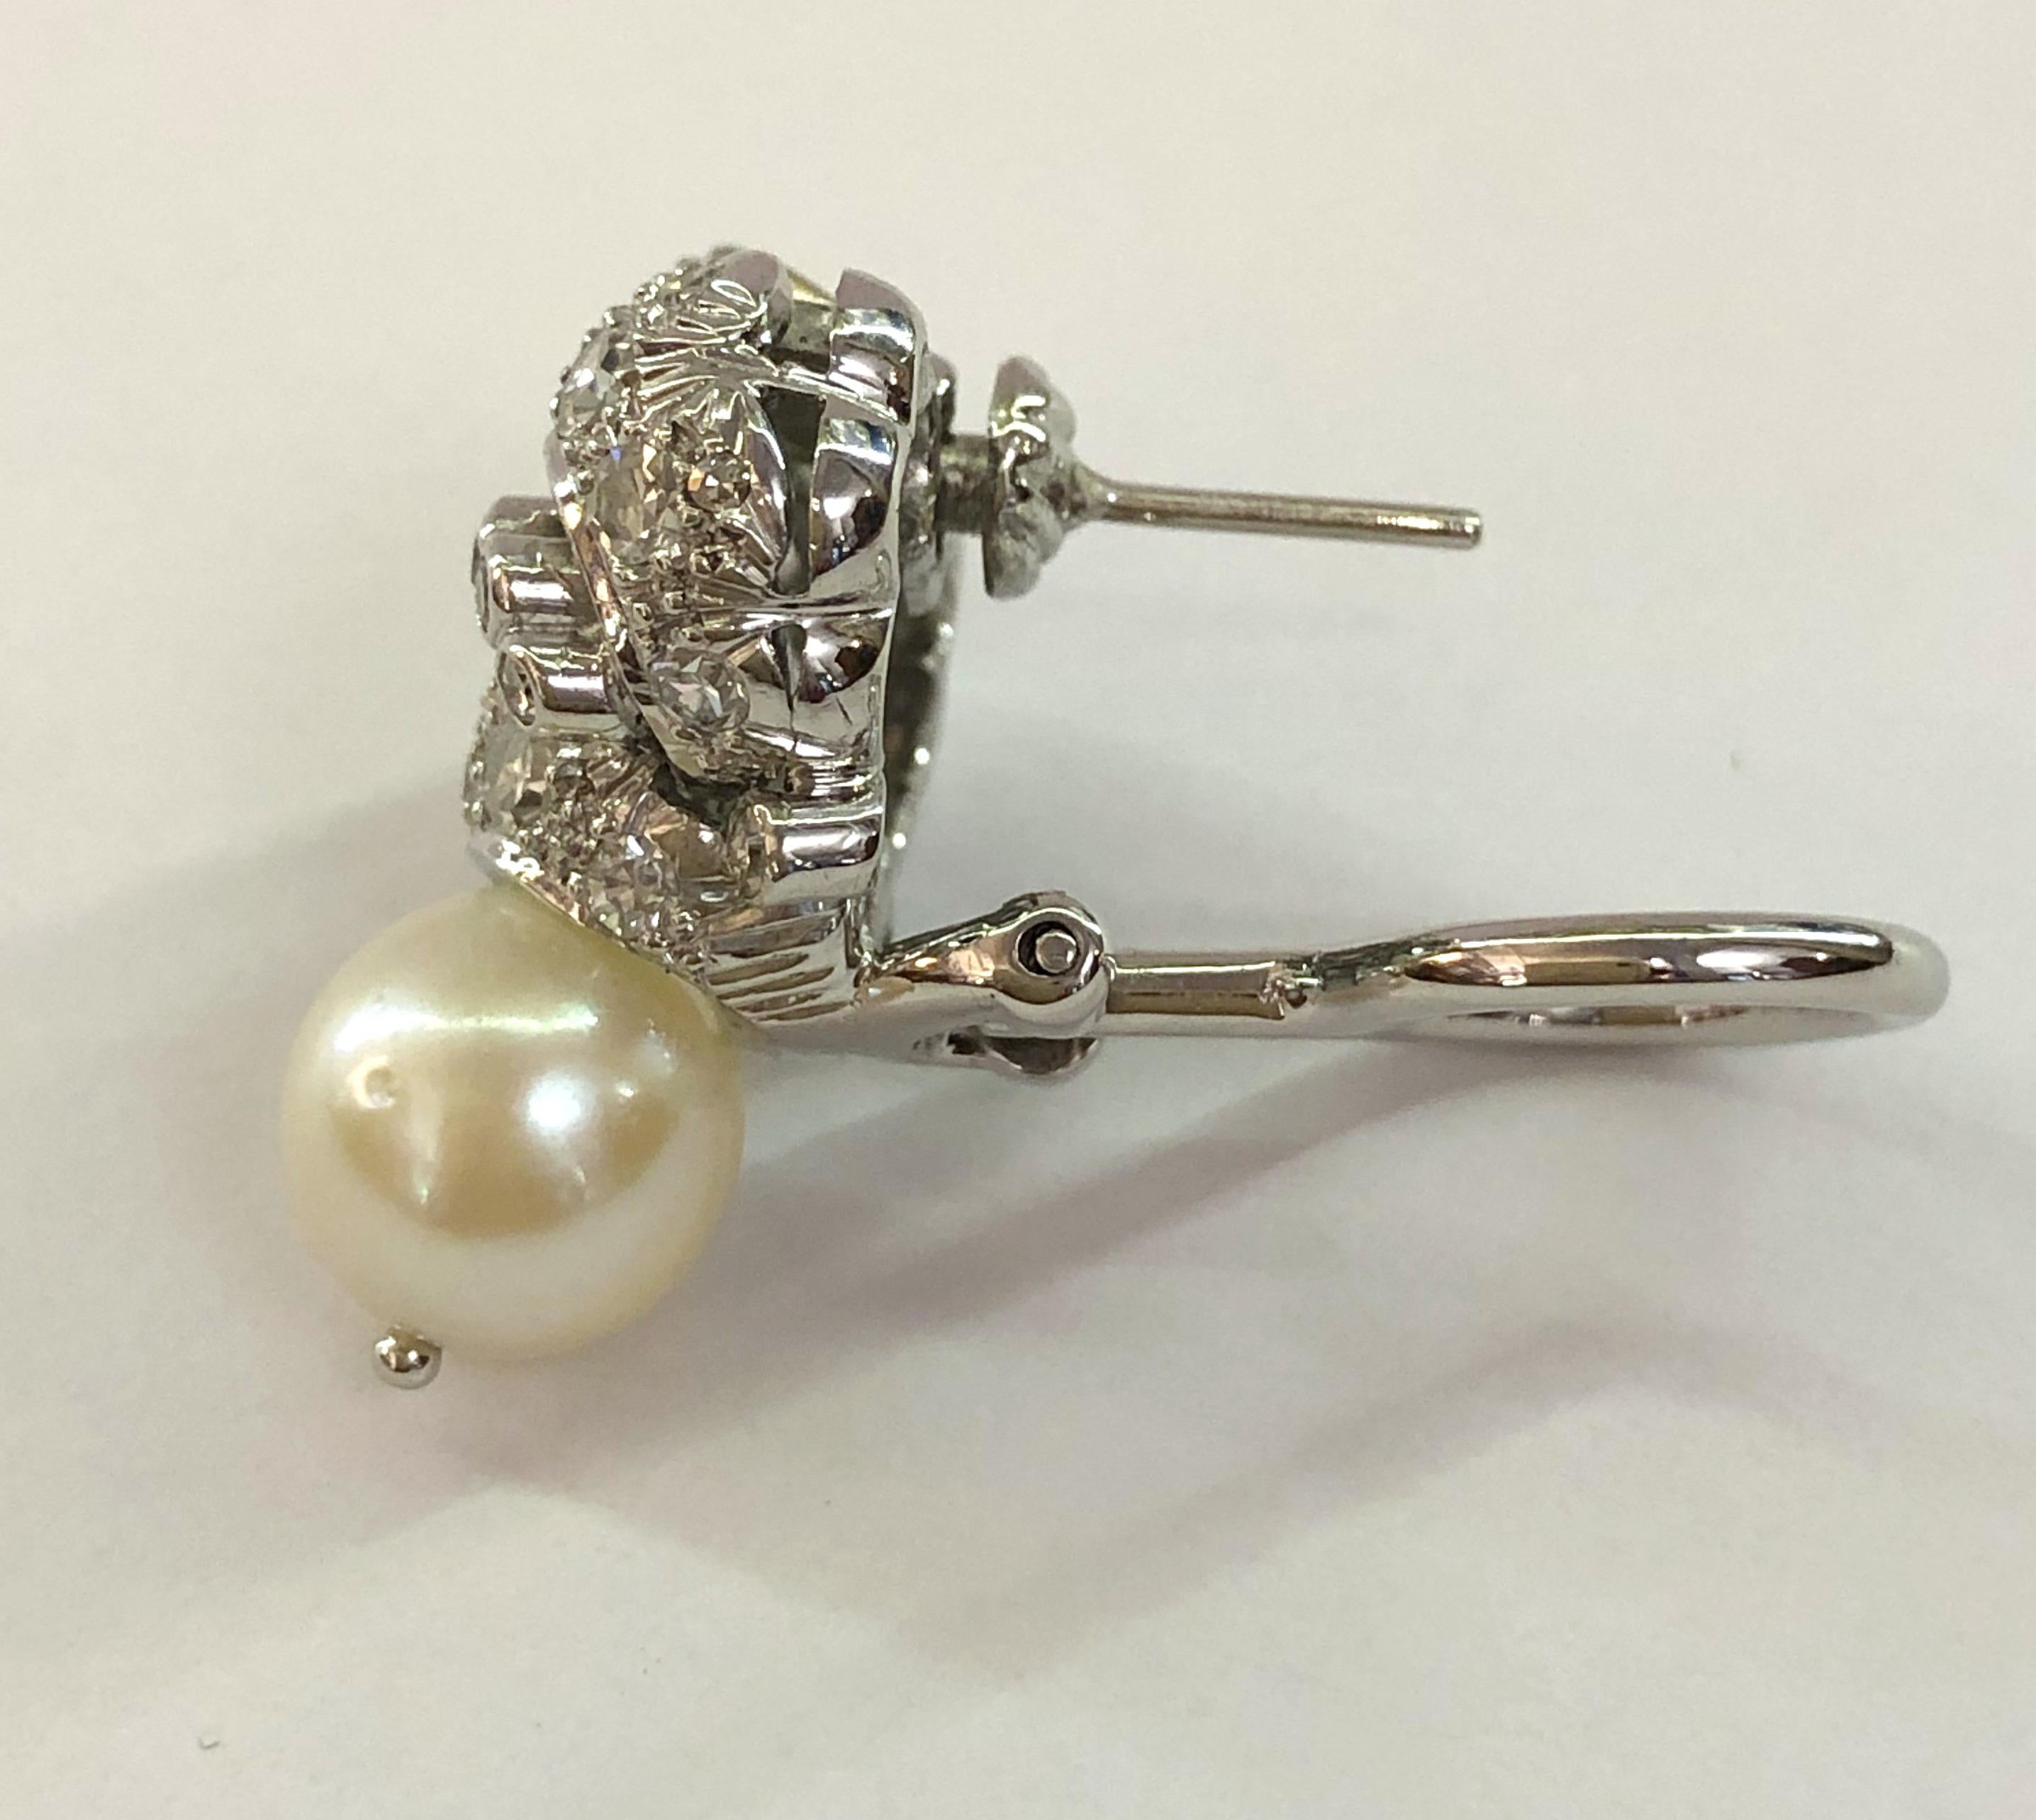 Pair of 18 Karat White Gold Pearl and Diamond Earrings In Good Condition For Sale In Palm Springs, CA